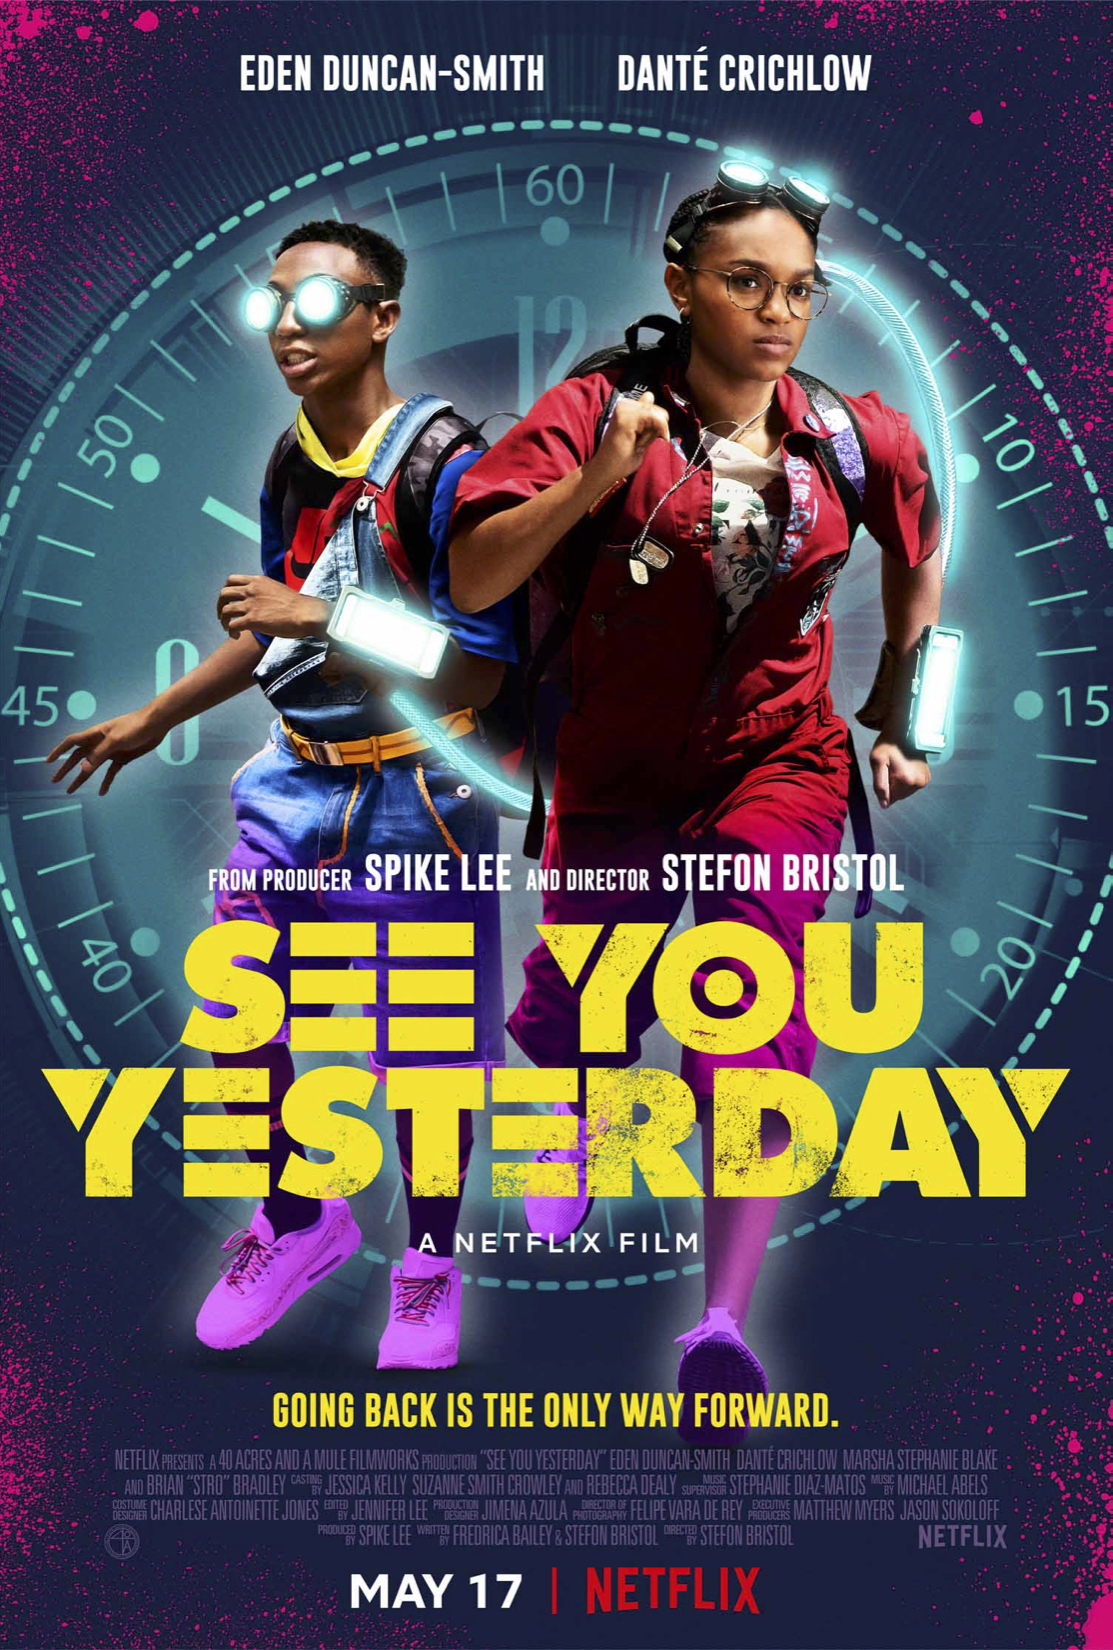 See You Yesterday sci-fi movies on Netflix